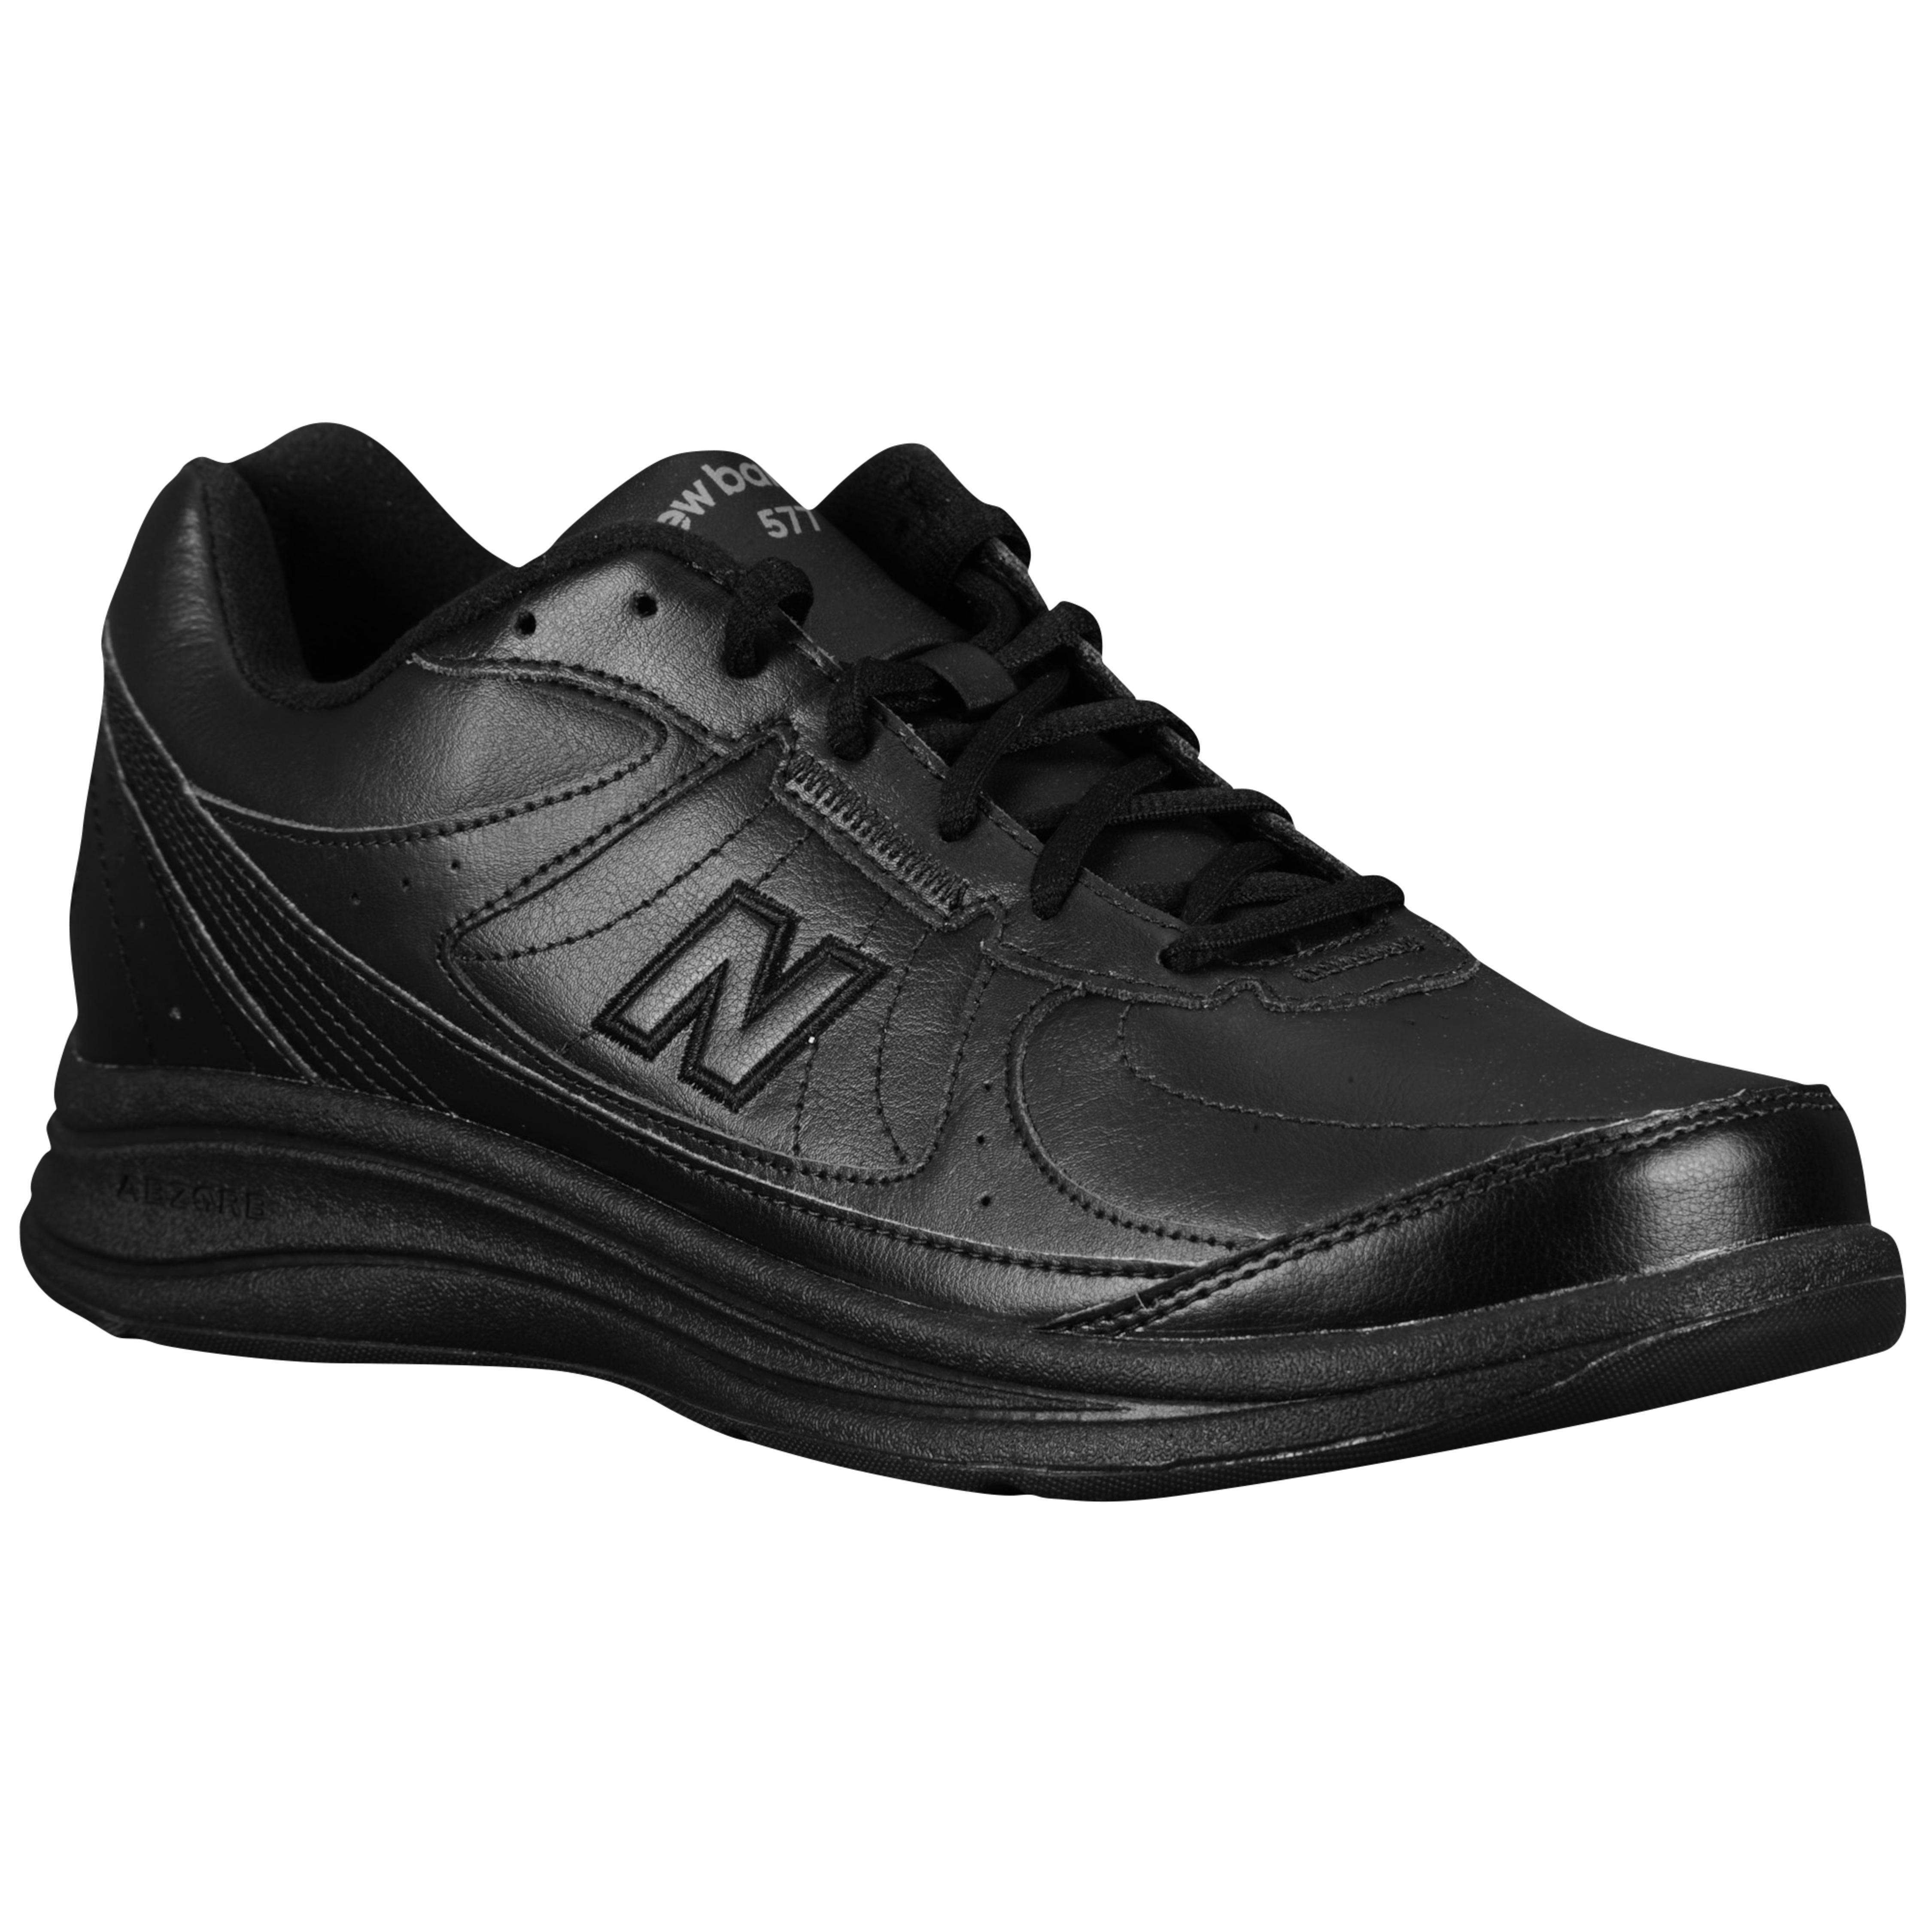 New Balance Leather 577 - Men's Walking Shoes - Black, Size 10.0 for